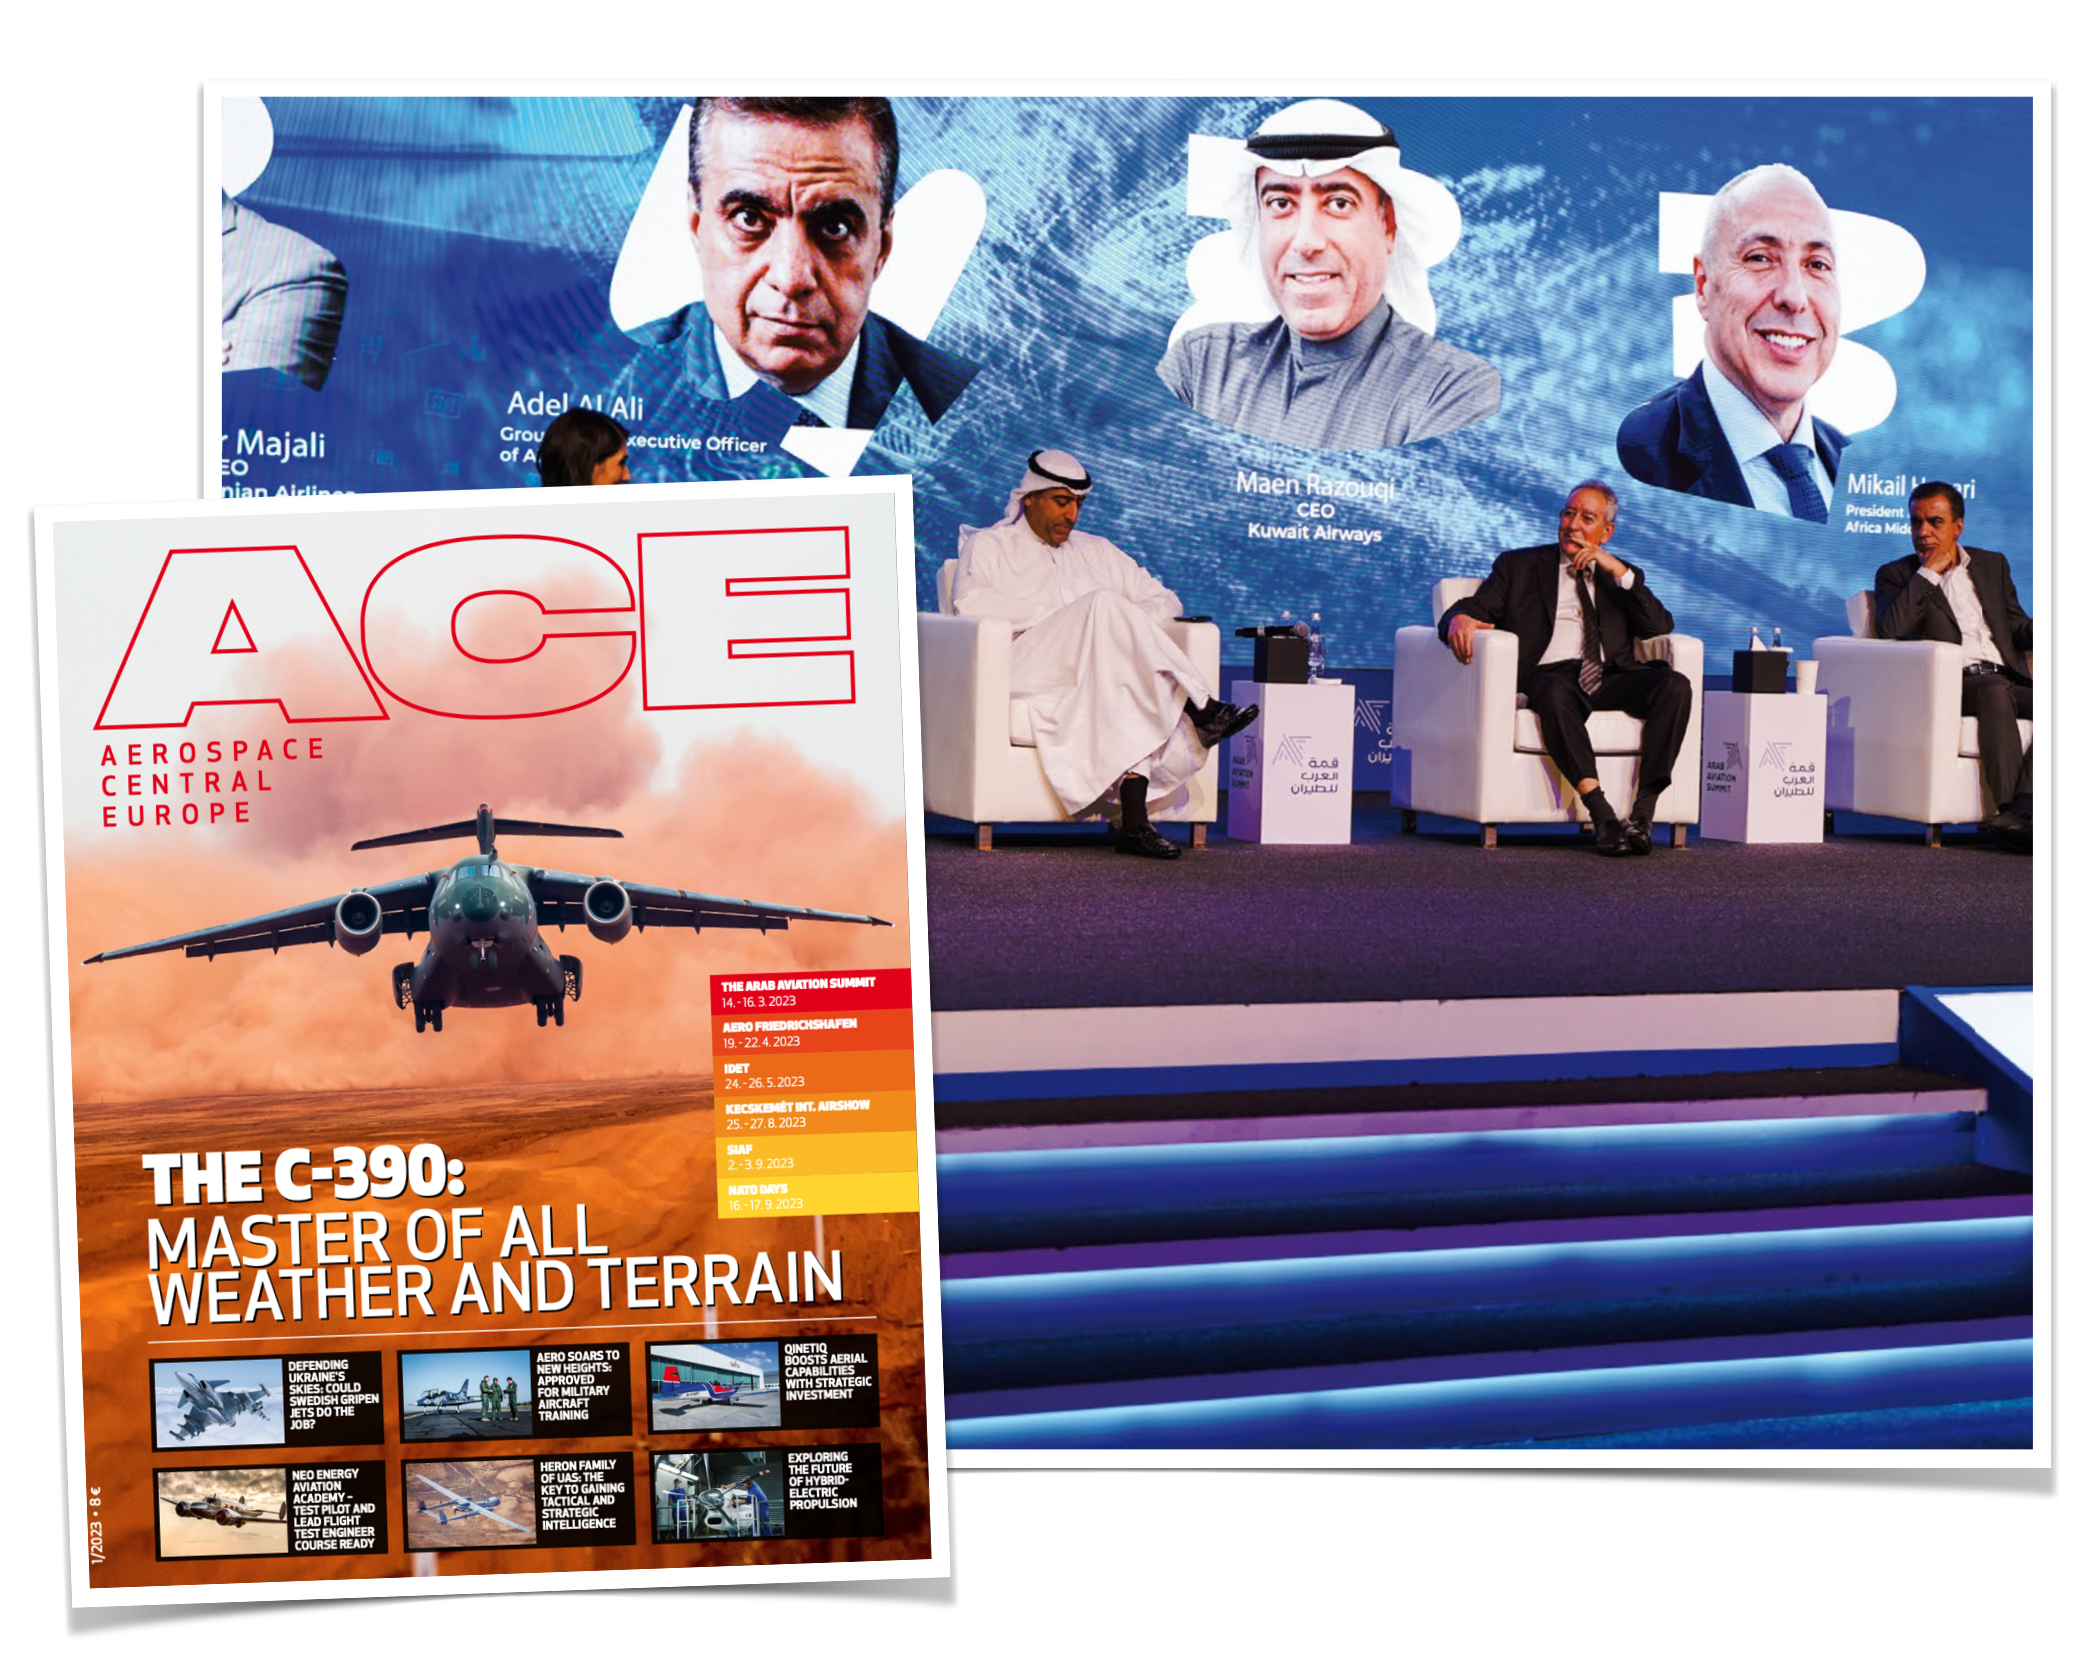 A Vision for the Future: Exploring Sustainable Solutions and Disruptive Technologies at the Arab Aviation Summit